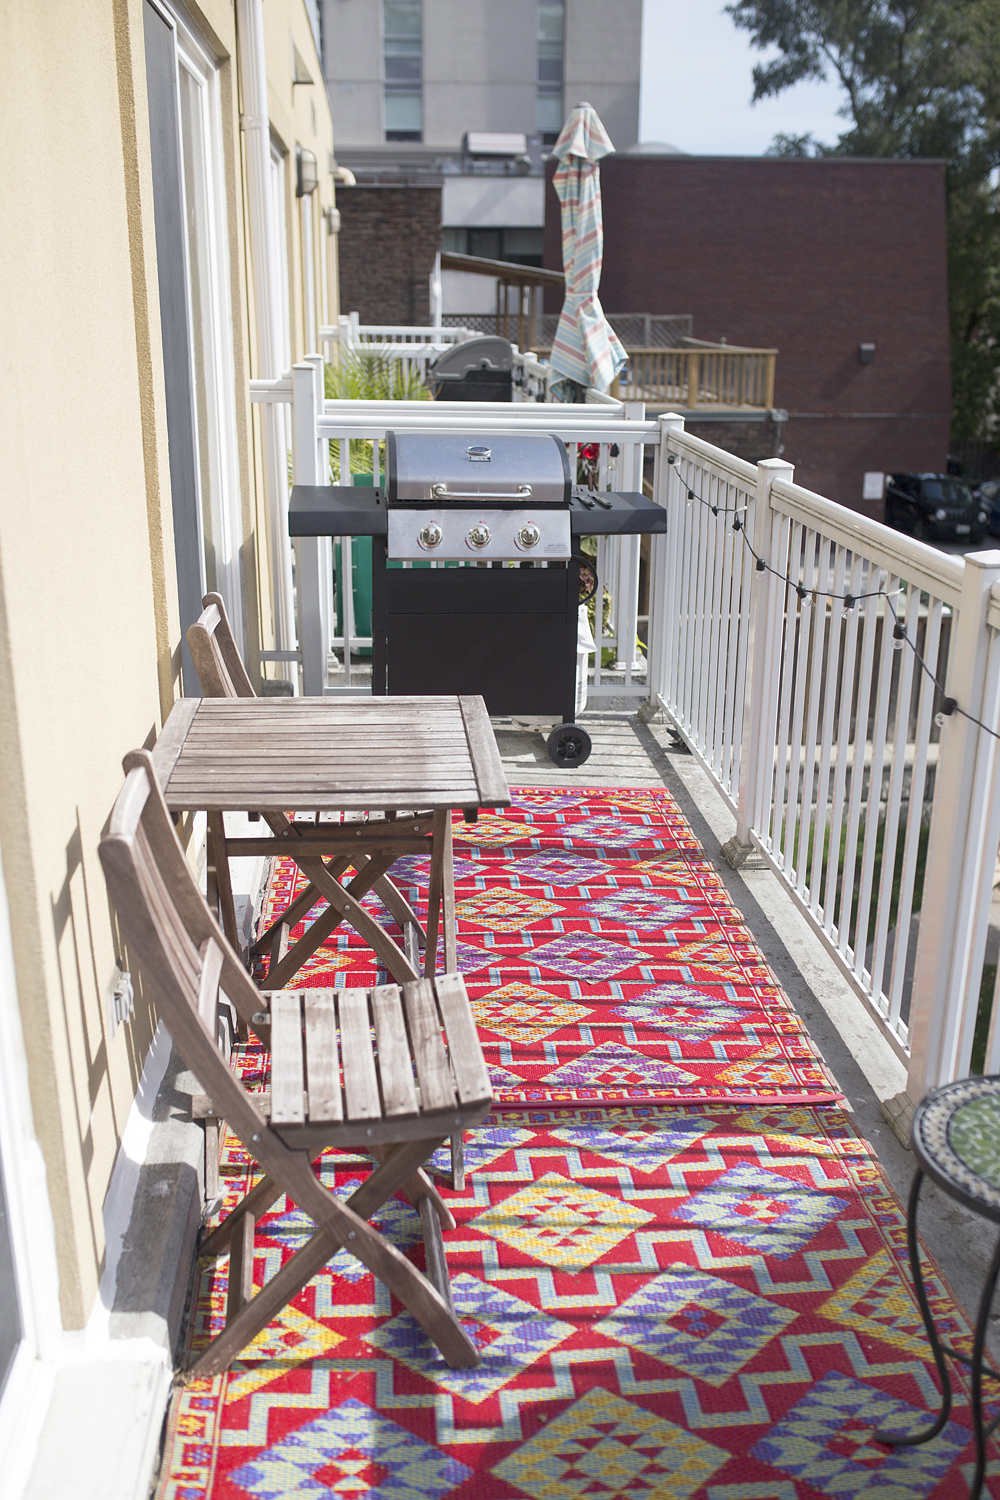 A narrow apartment balcony with an outdoor area rug, BBQ and patio furniture